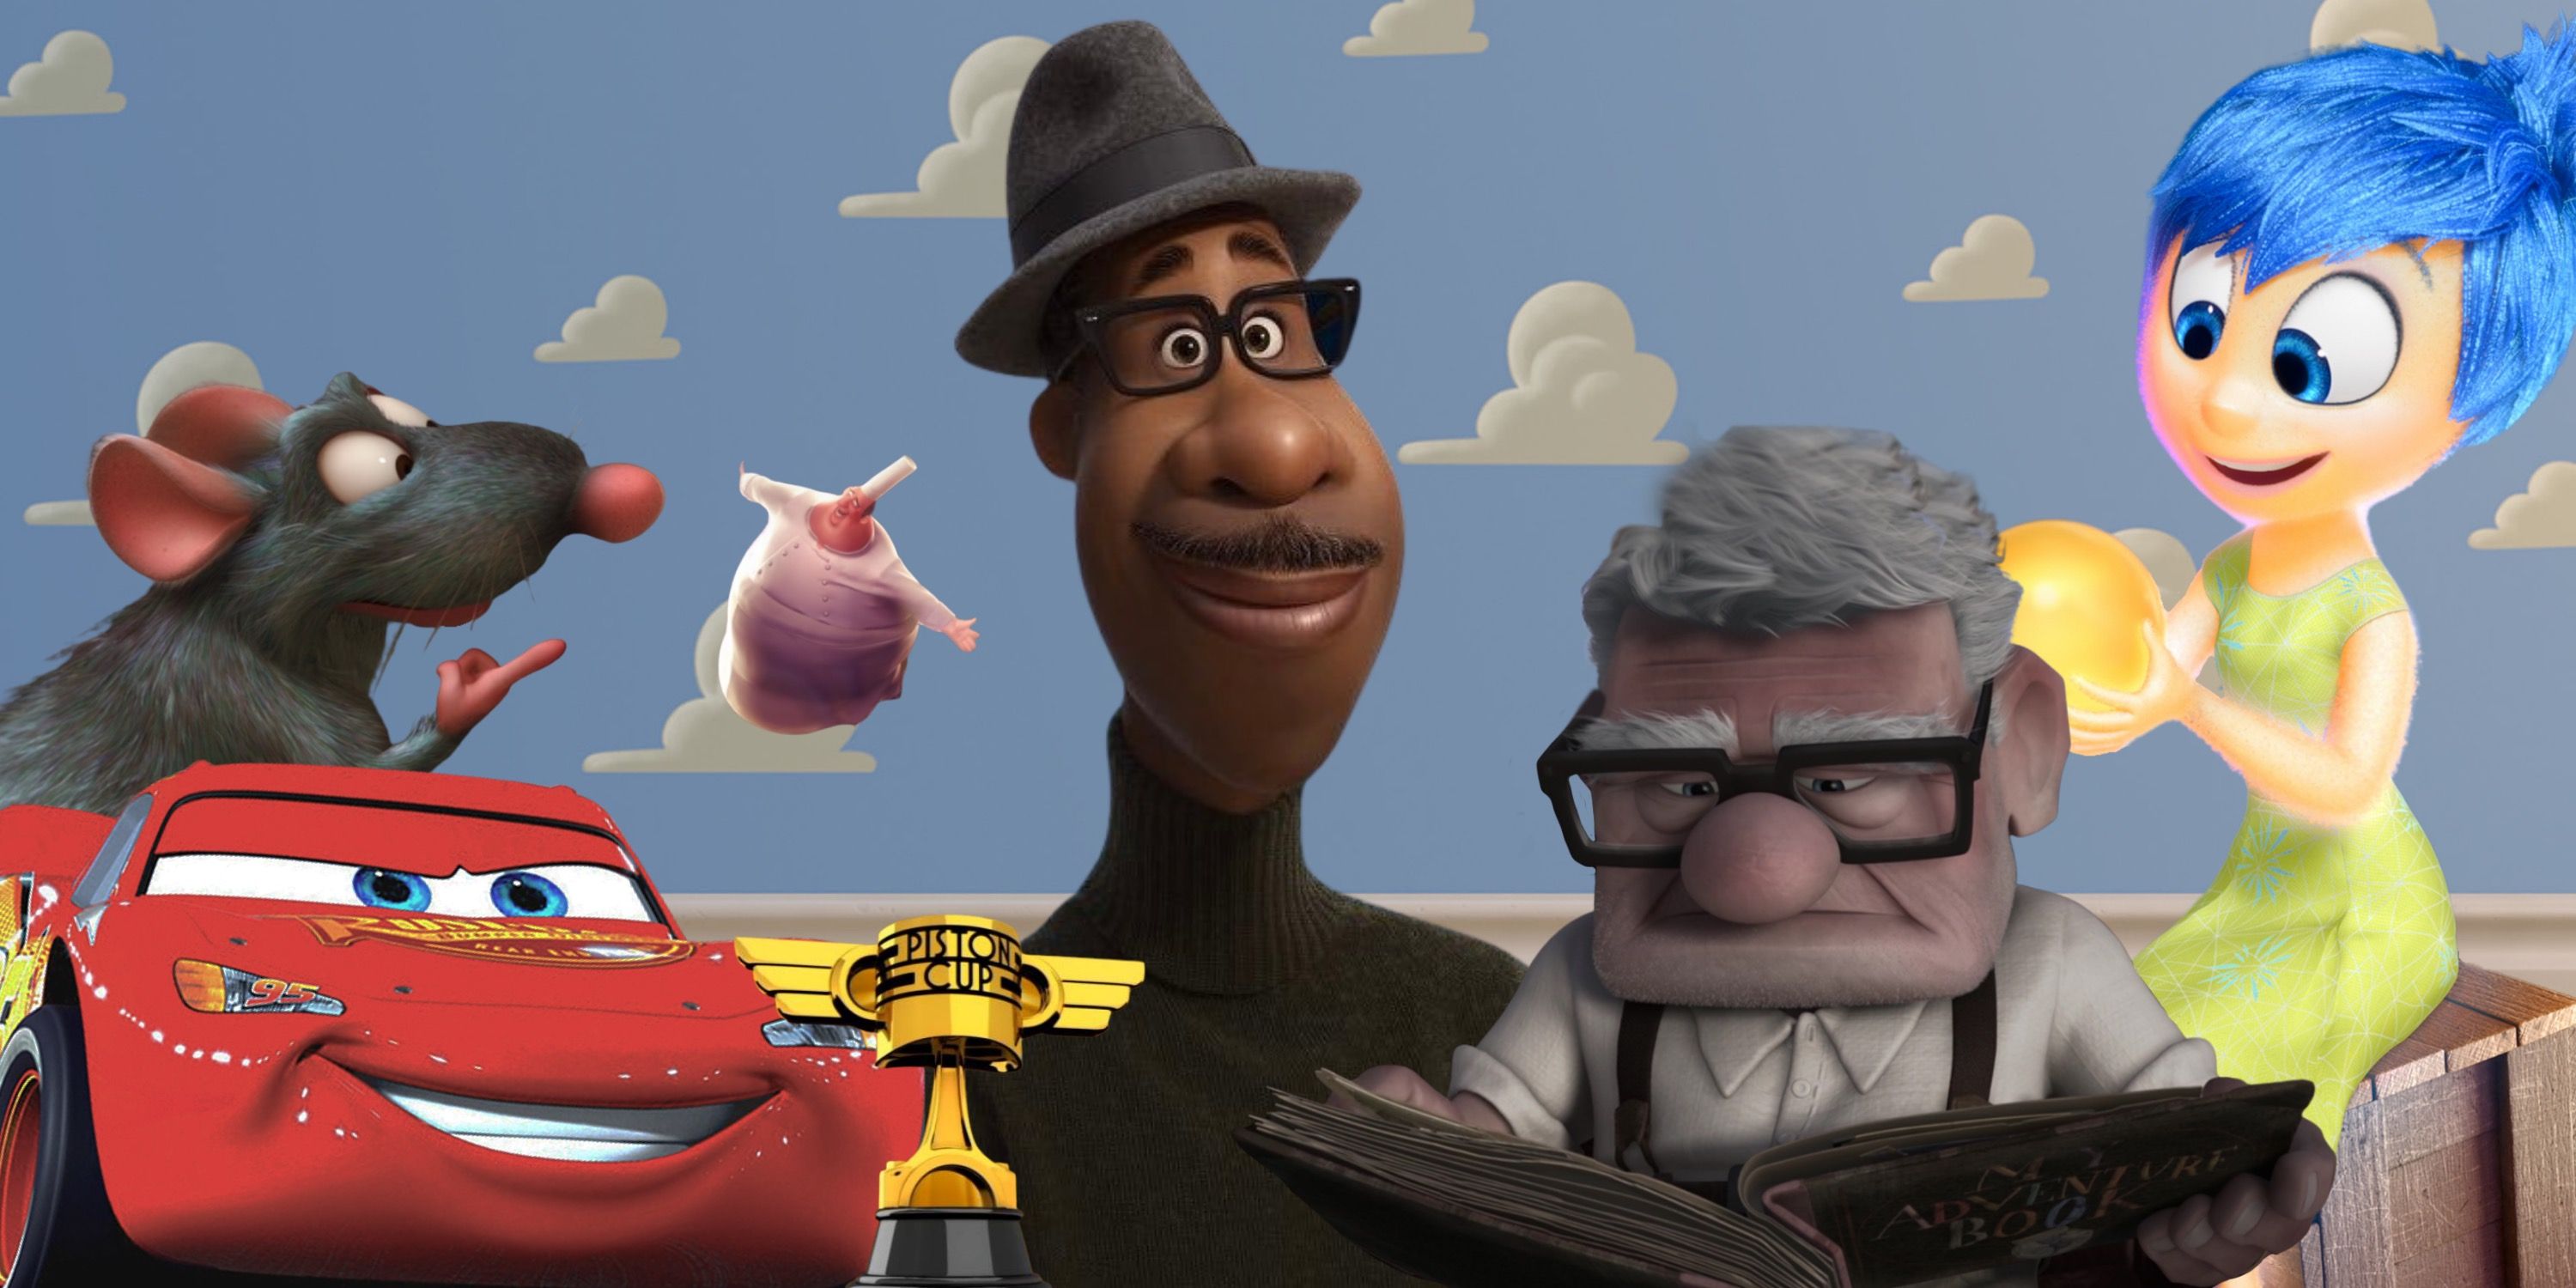 film franchises, Secondly, we have Pixar Animation Studios with a rating of 88.9%. 